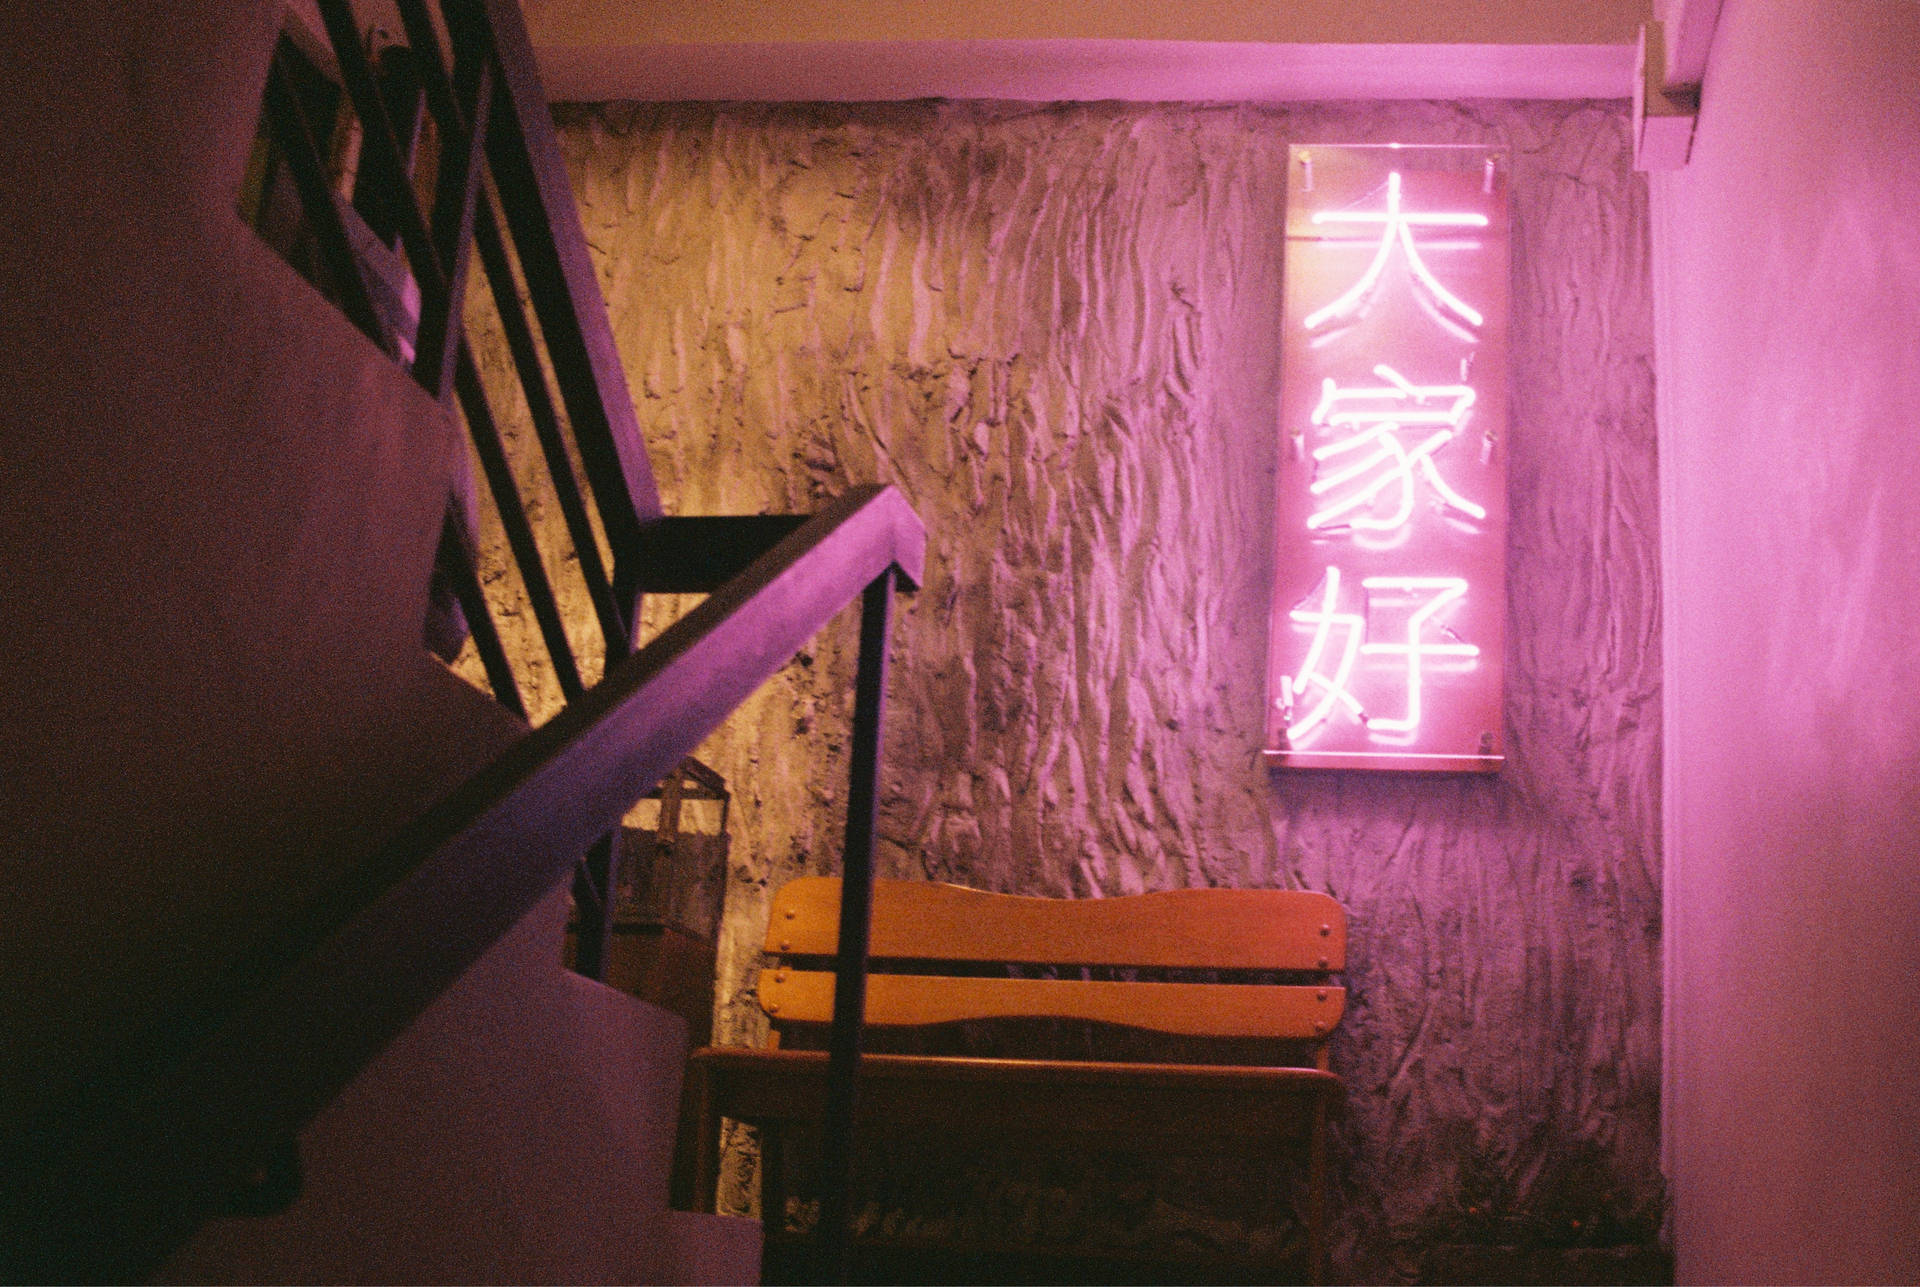 Japanese Stairwell Sign Aesthetic Photography